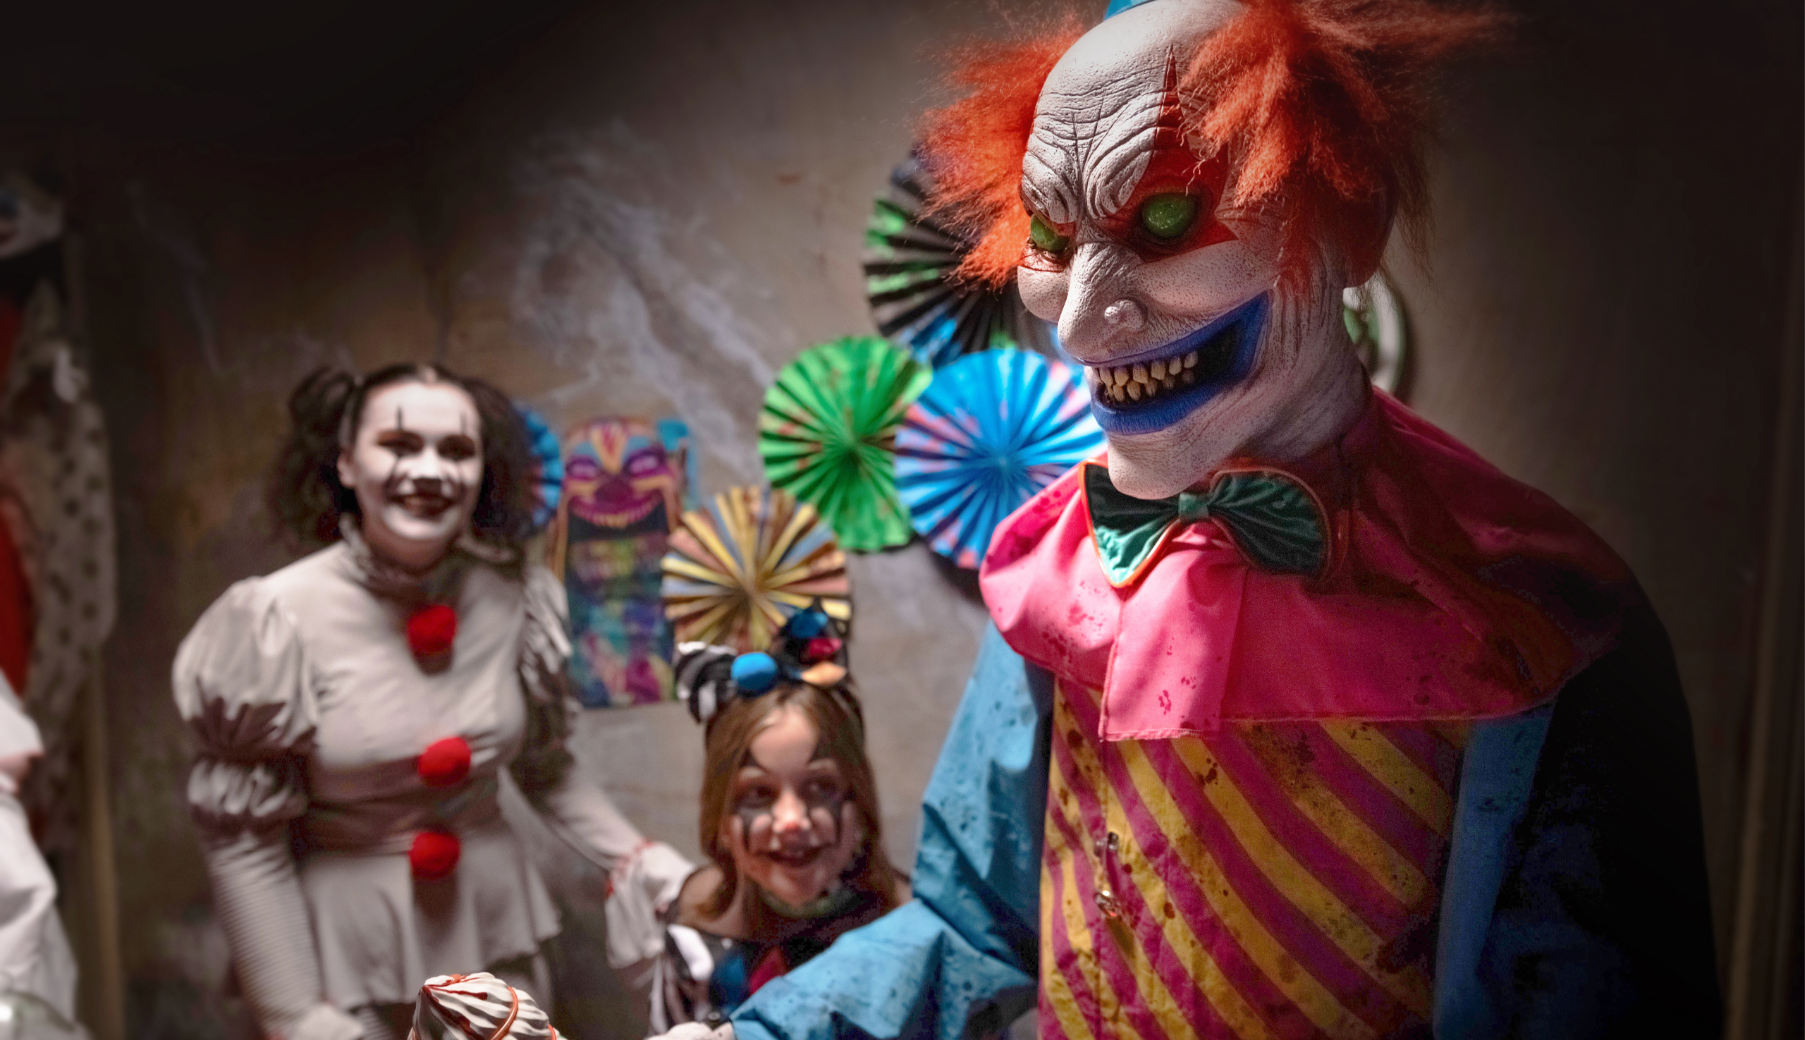 A woman, a girl and a man wearing scary clown costumes in a room decorated with creepy carnival Halloween decor.